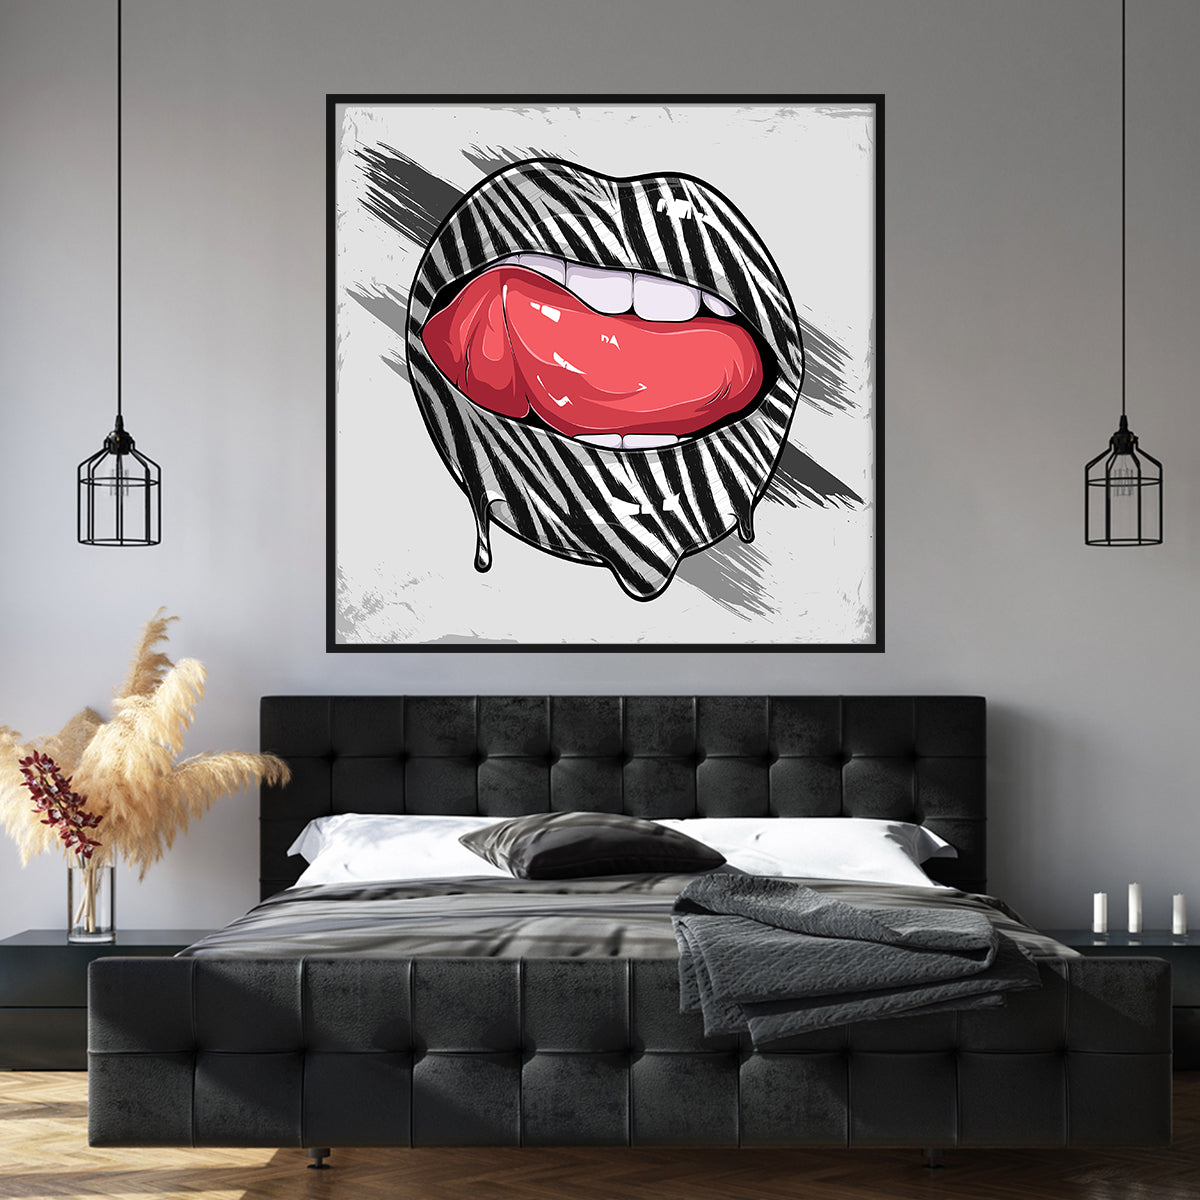 Woman Lips with Zebra Pattern Art Posters-Square Posters NOT FRAMED-CetArt-8″x8″ inches-CetArt